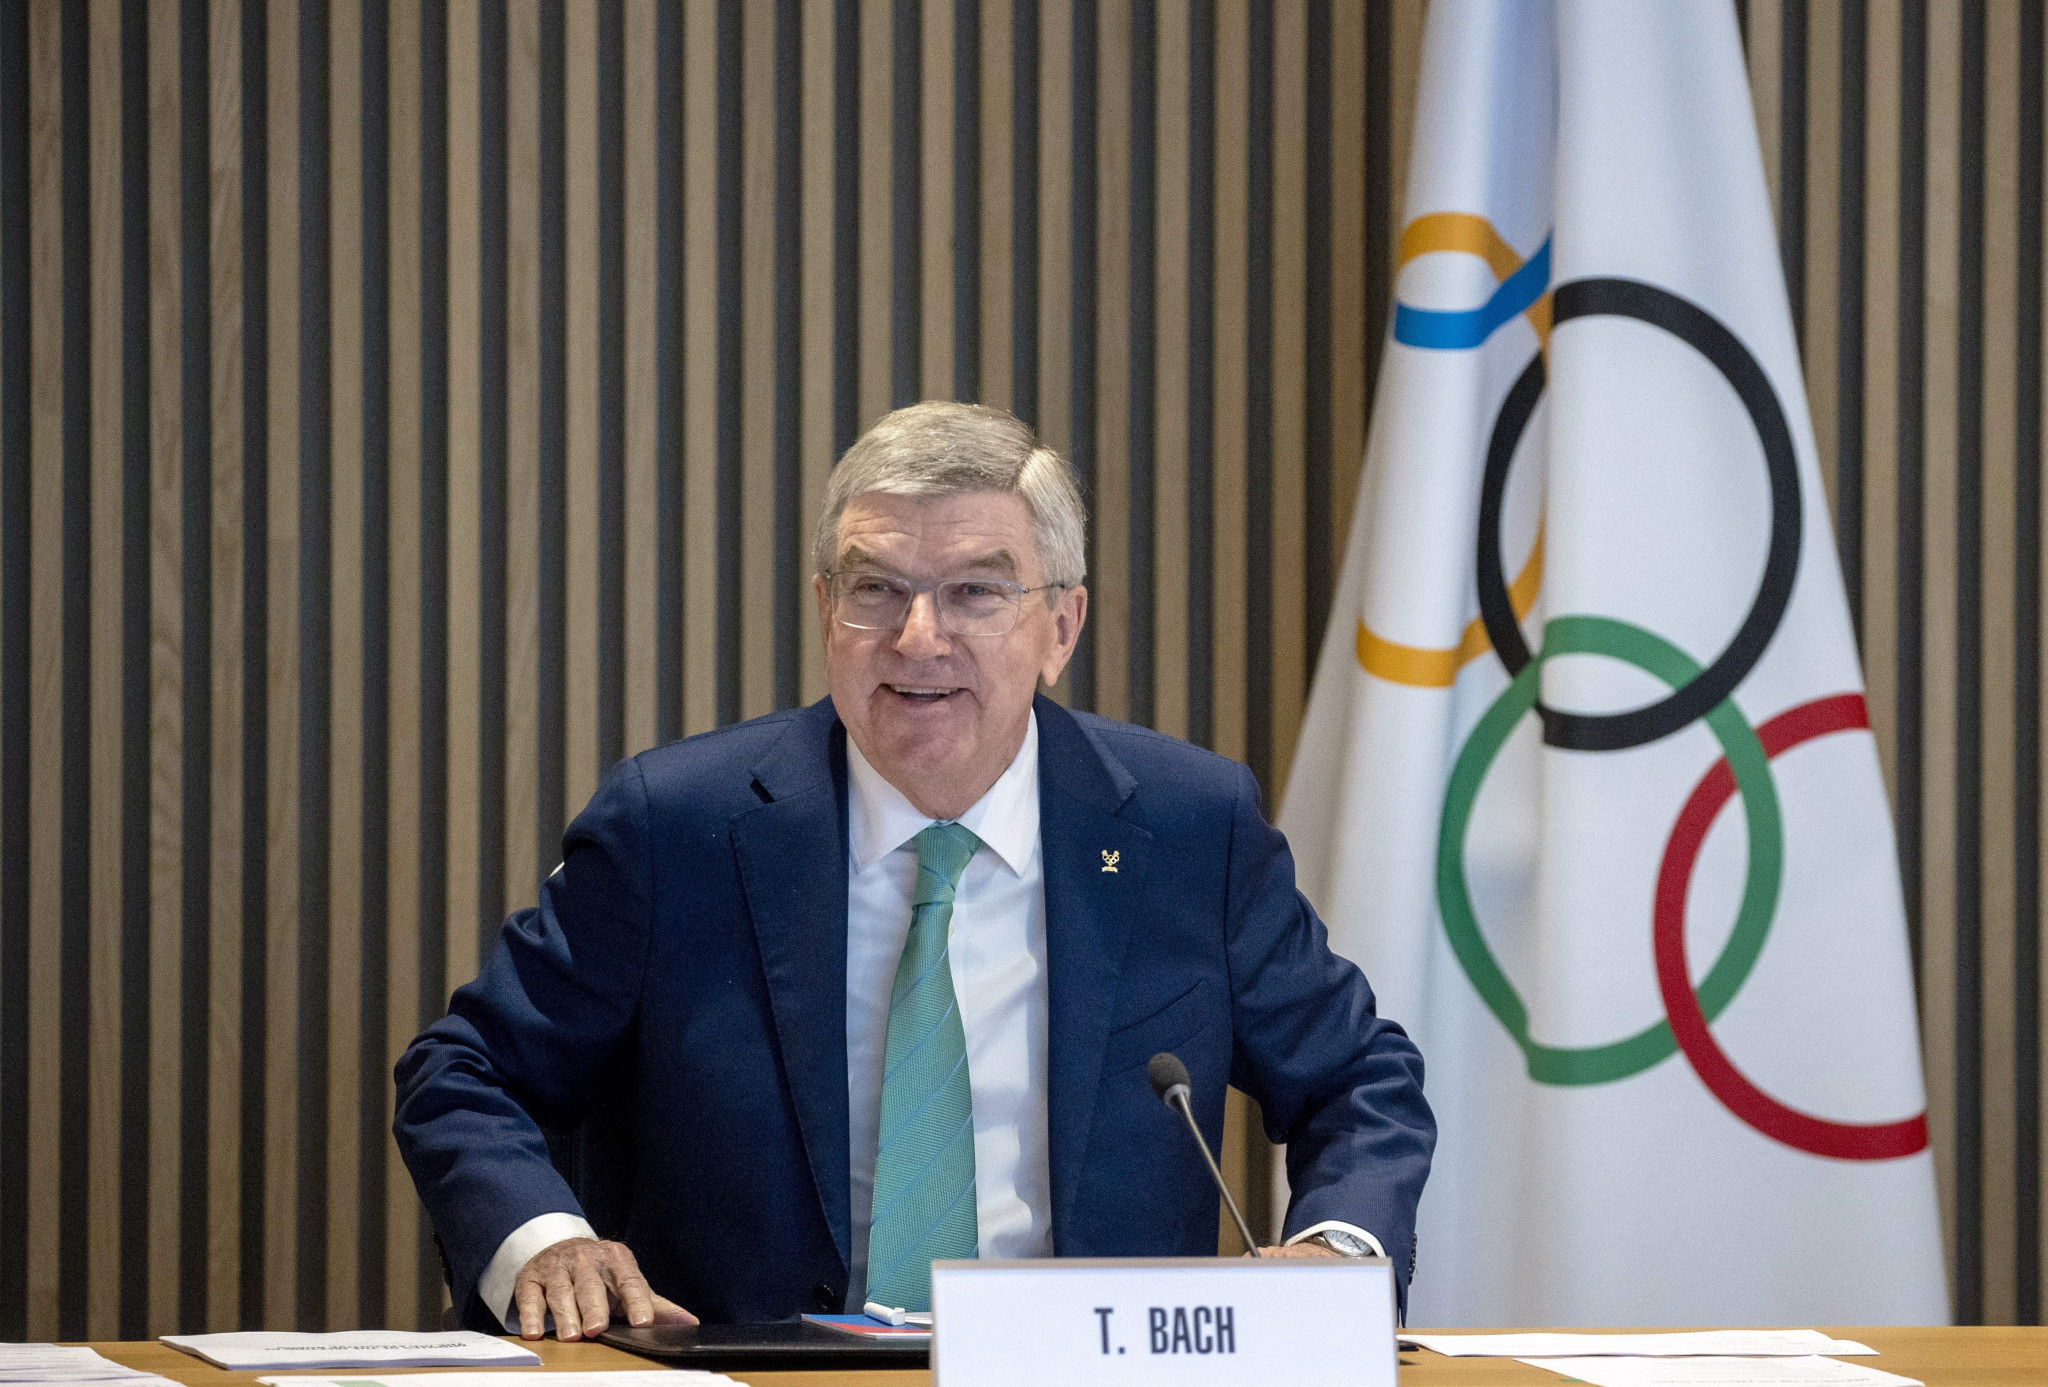 IOC President Thomas Bach has come under fire over his organisation's decision to 